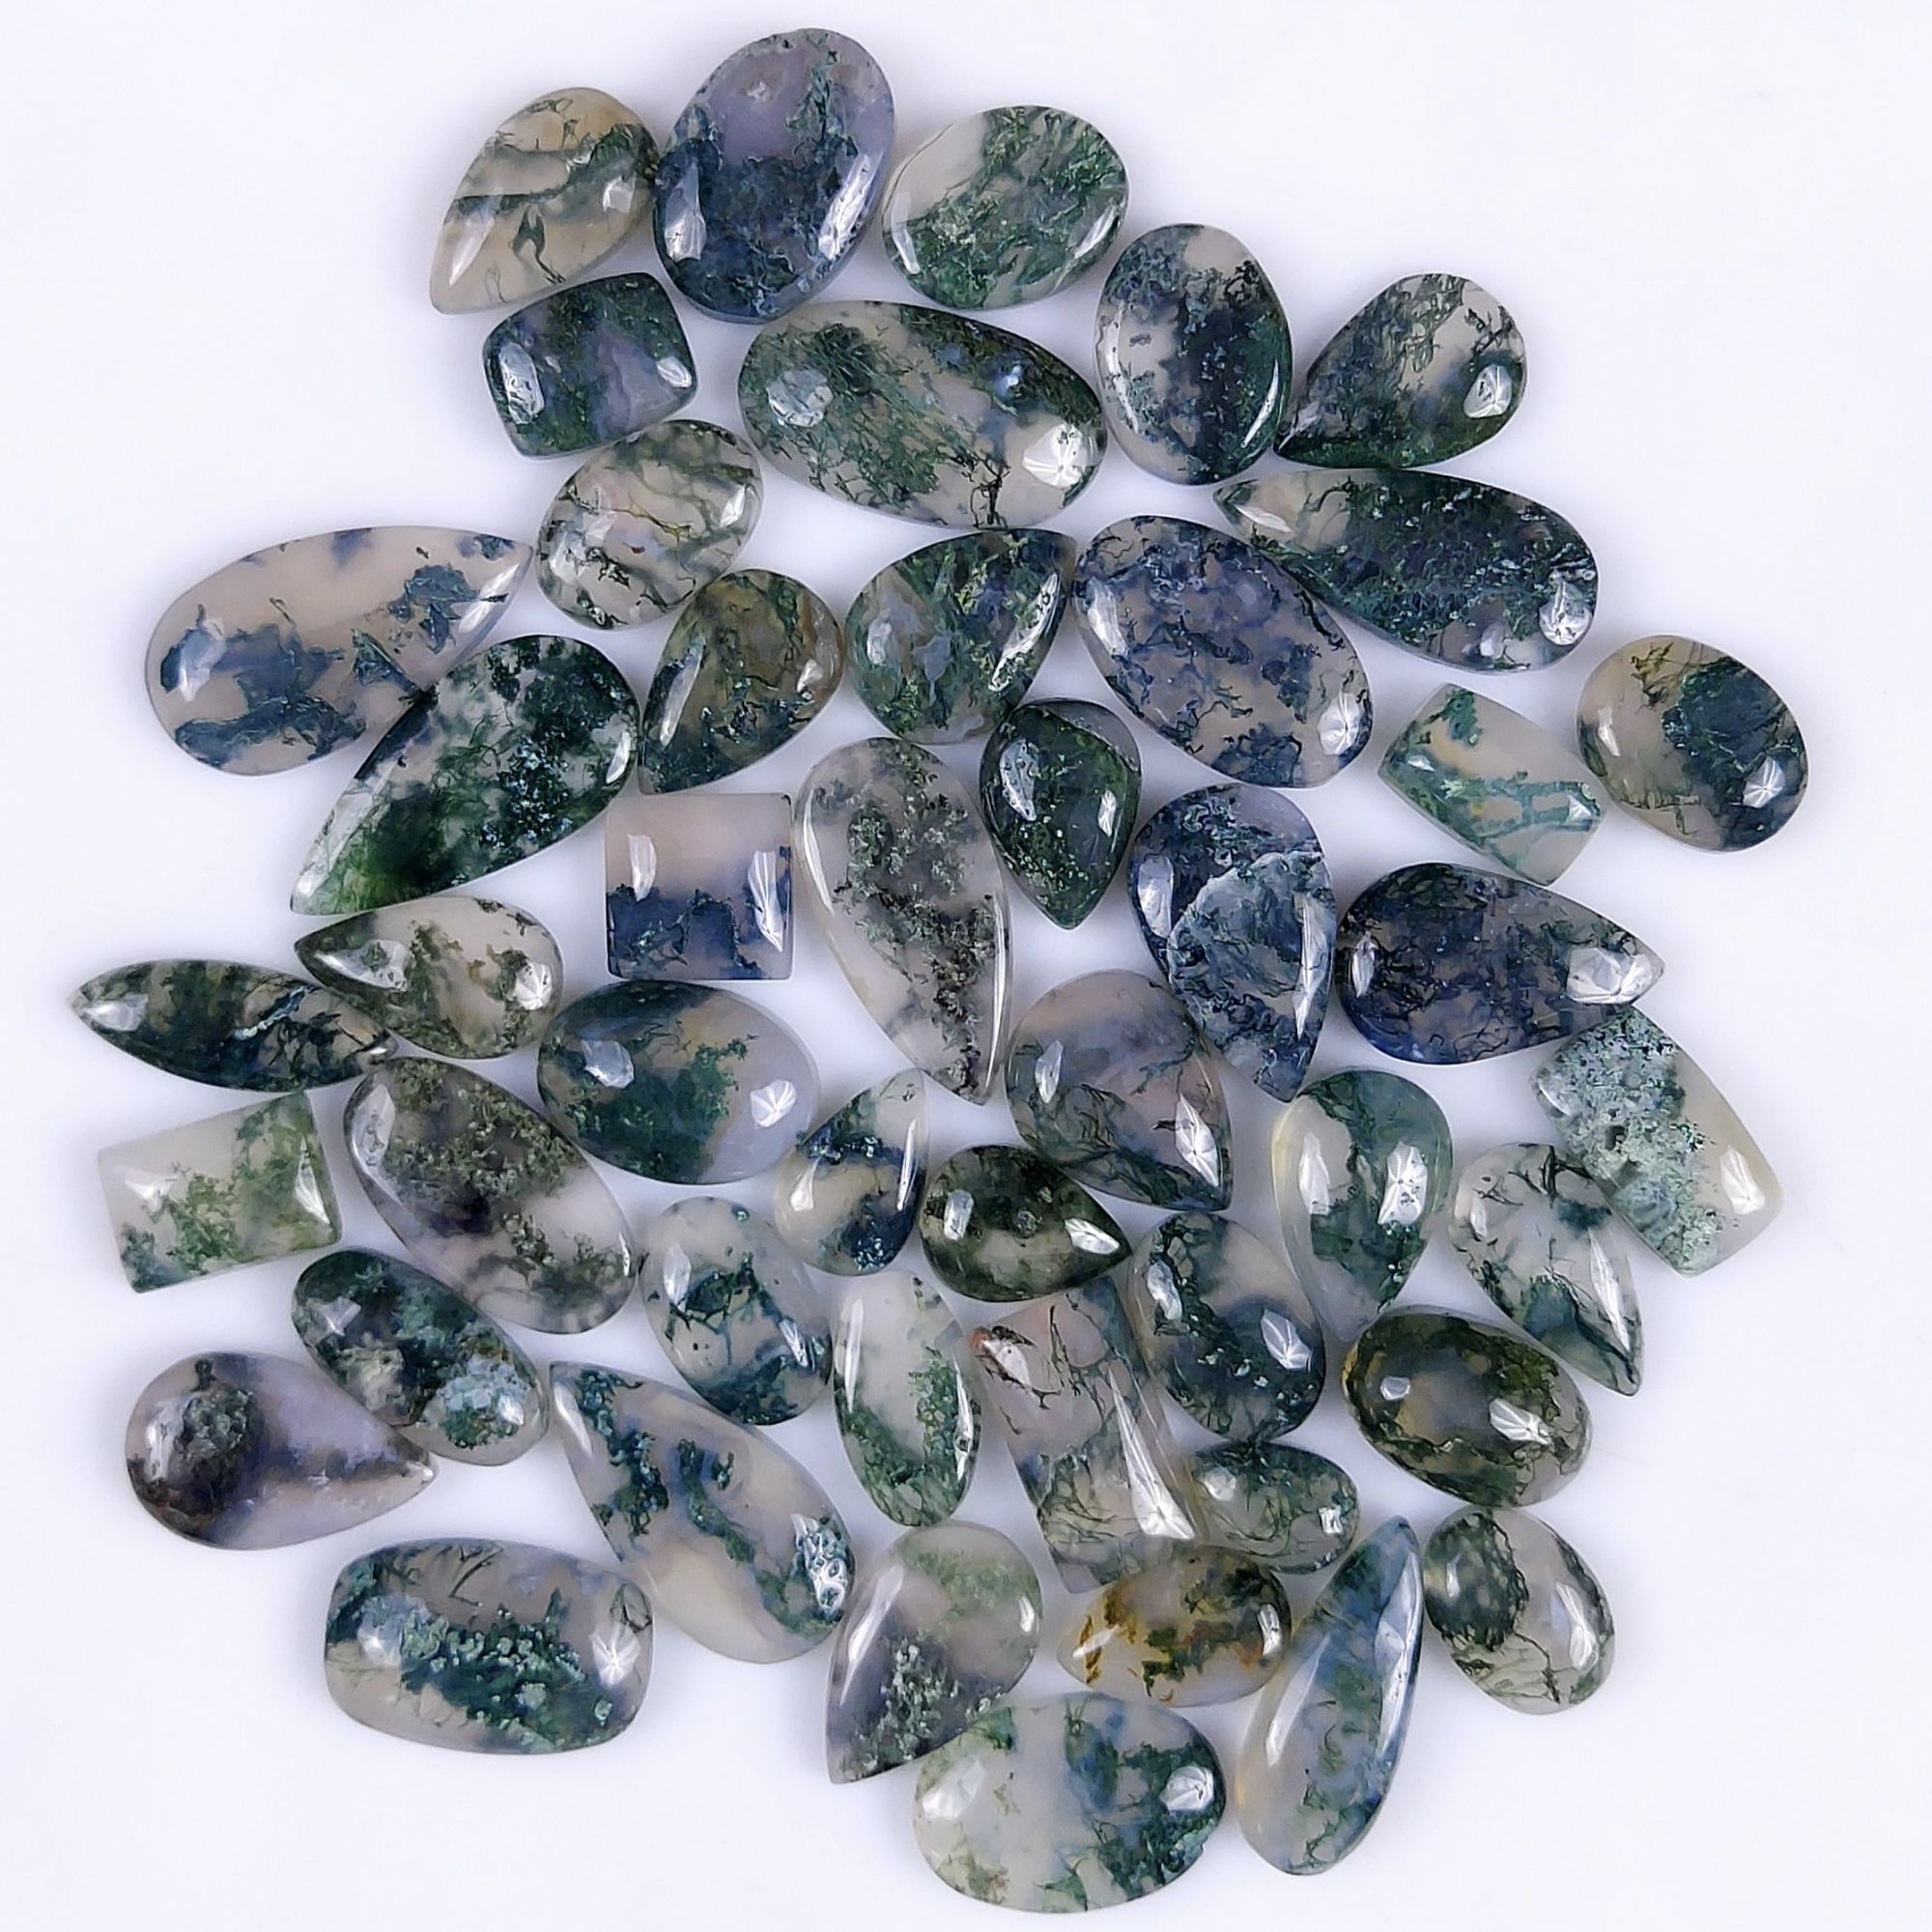 47Pcs 240Cts Natural Green Moss Agate Cabochon Lots Mixed Shapes And Sizes Moss Agate loose gemstone Cabochon Wholesale Lot 20x8 10x7mm#G-371